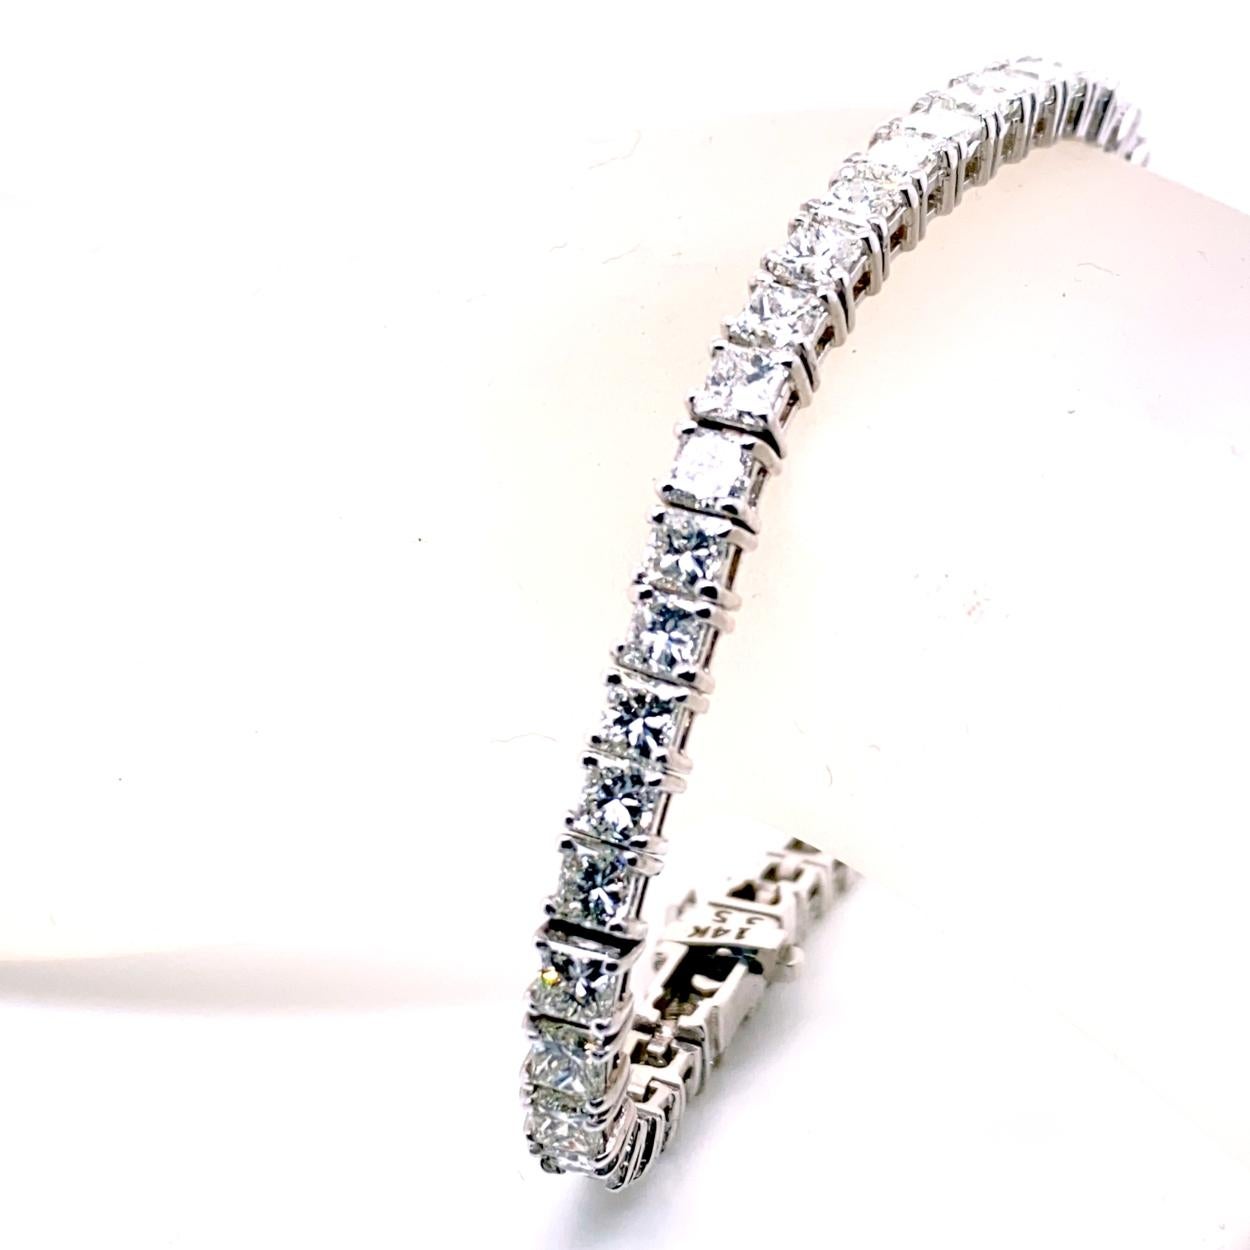 This Diamond Tennis Bracelet consists of 50 Links of 4-Prong Set 3.4mm (1/4 Ct) Princess Cut diamonds set in 14K White Gold.   The bracelet comes with a  Built-In Safety Lock to protect it from loss. 
Total Weight of diamonds: 12.02 Ct 
Total Weight